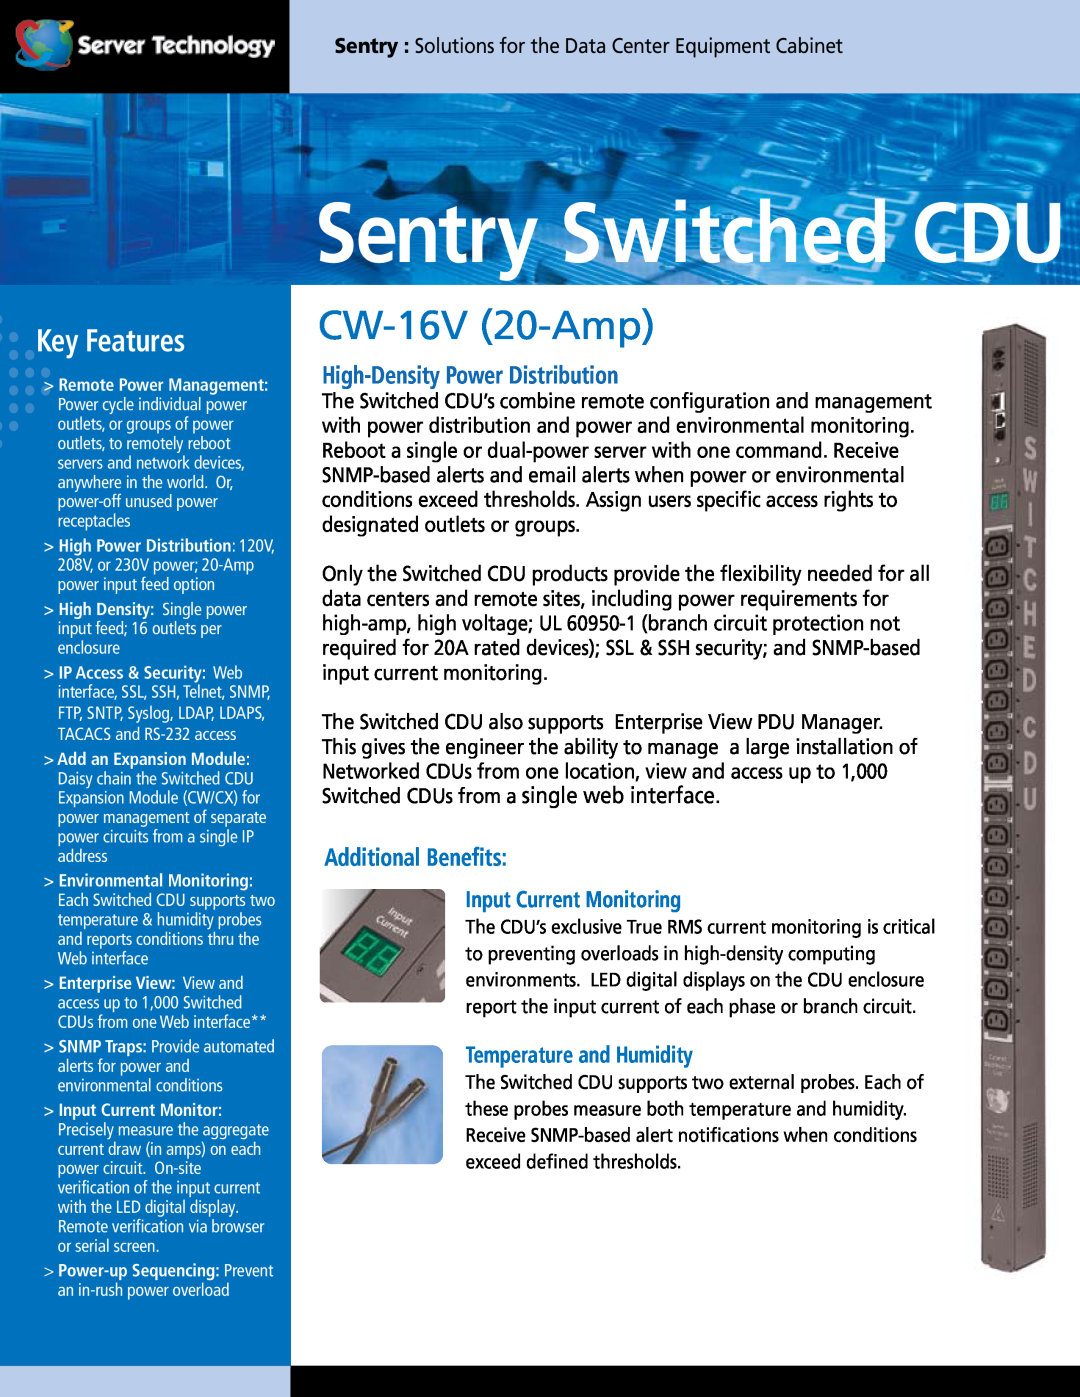 Server Technology CDUCW-16V-MX technical specifications Sentry Switched CDU, CW-16V 20-Amp, Key Features 